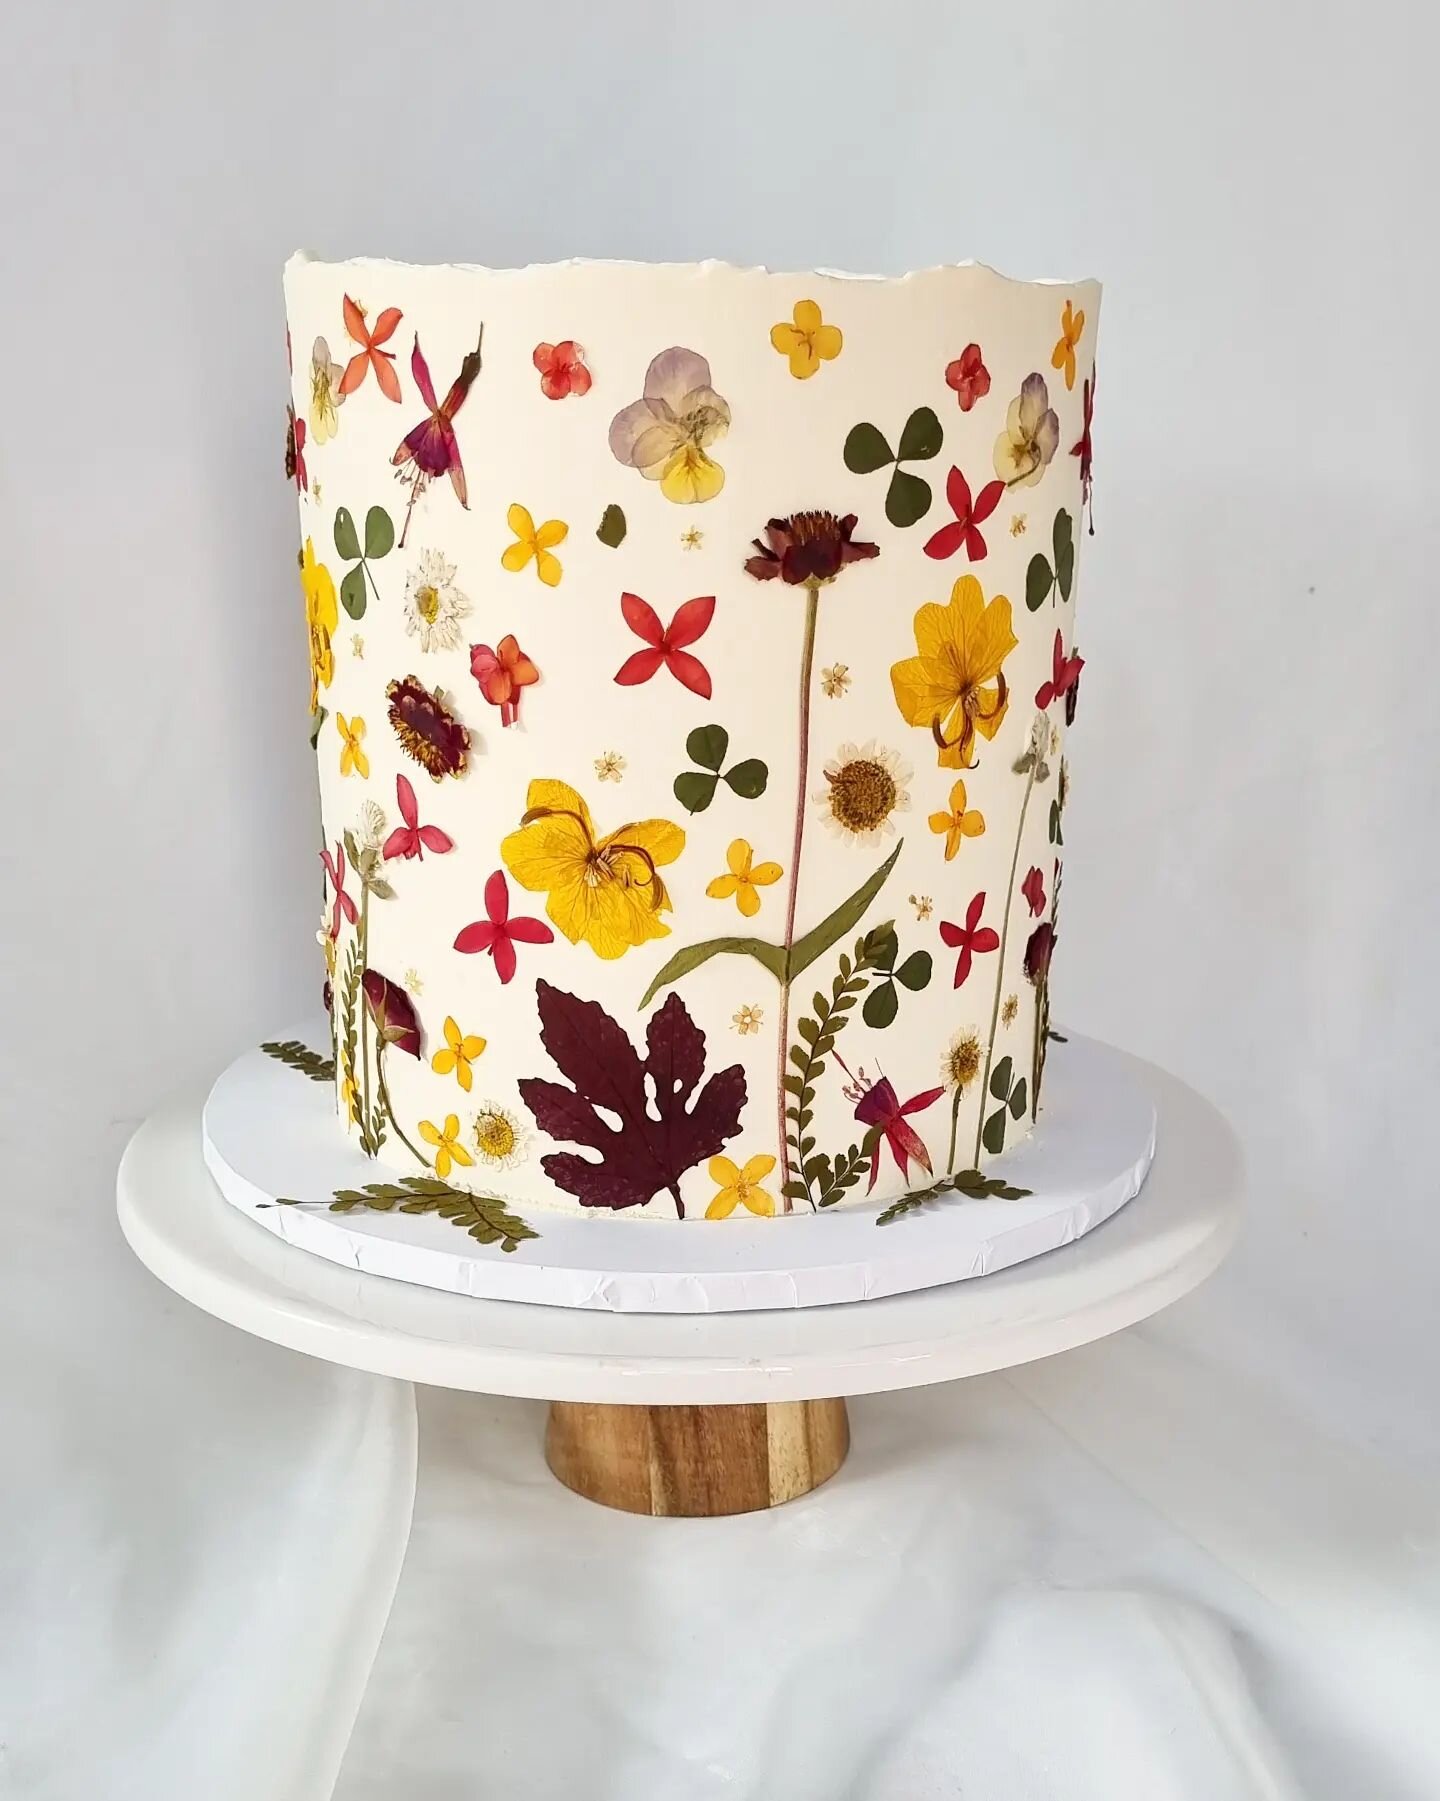 Autumn vibes.....

So in love with this cake. 
Decadent chocolate mud cake dotted with raspberries and layered with a silky dark chocolate ganache.

For your next special occasion cake or cupcakes, please visit our website, link in bio or email us at